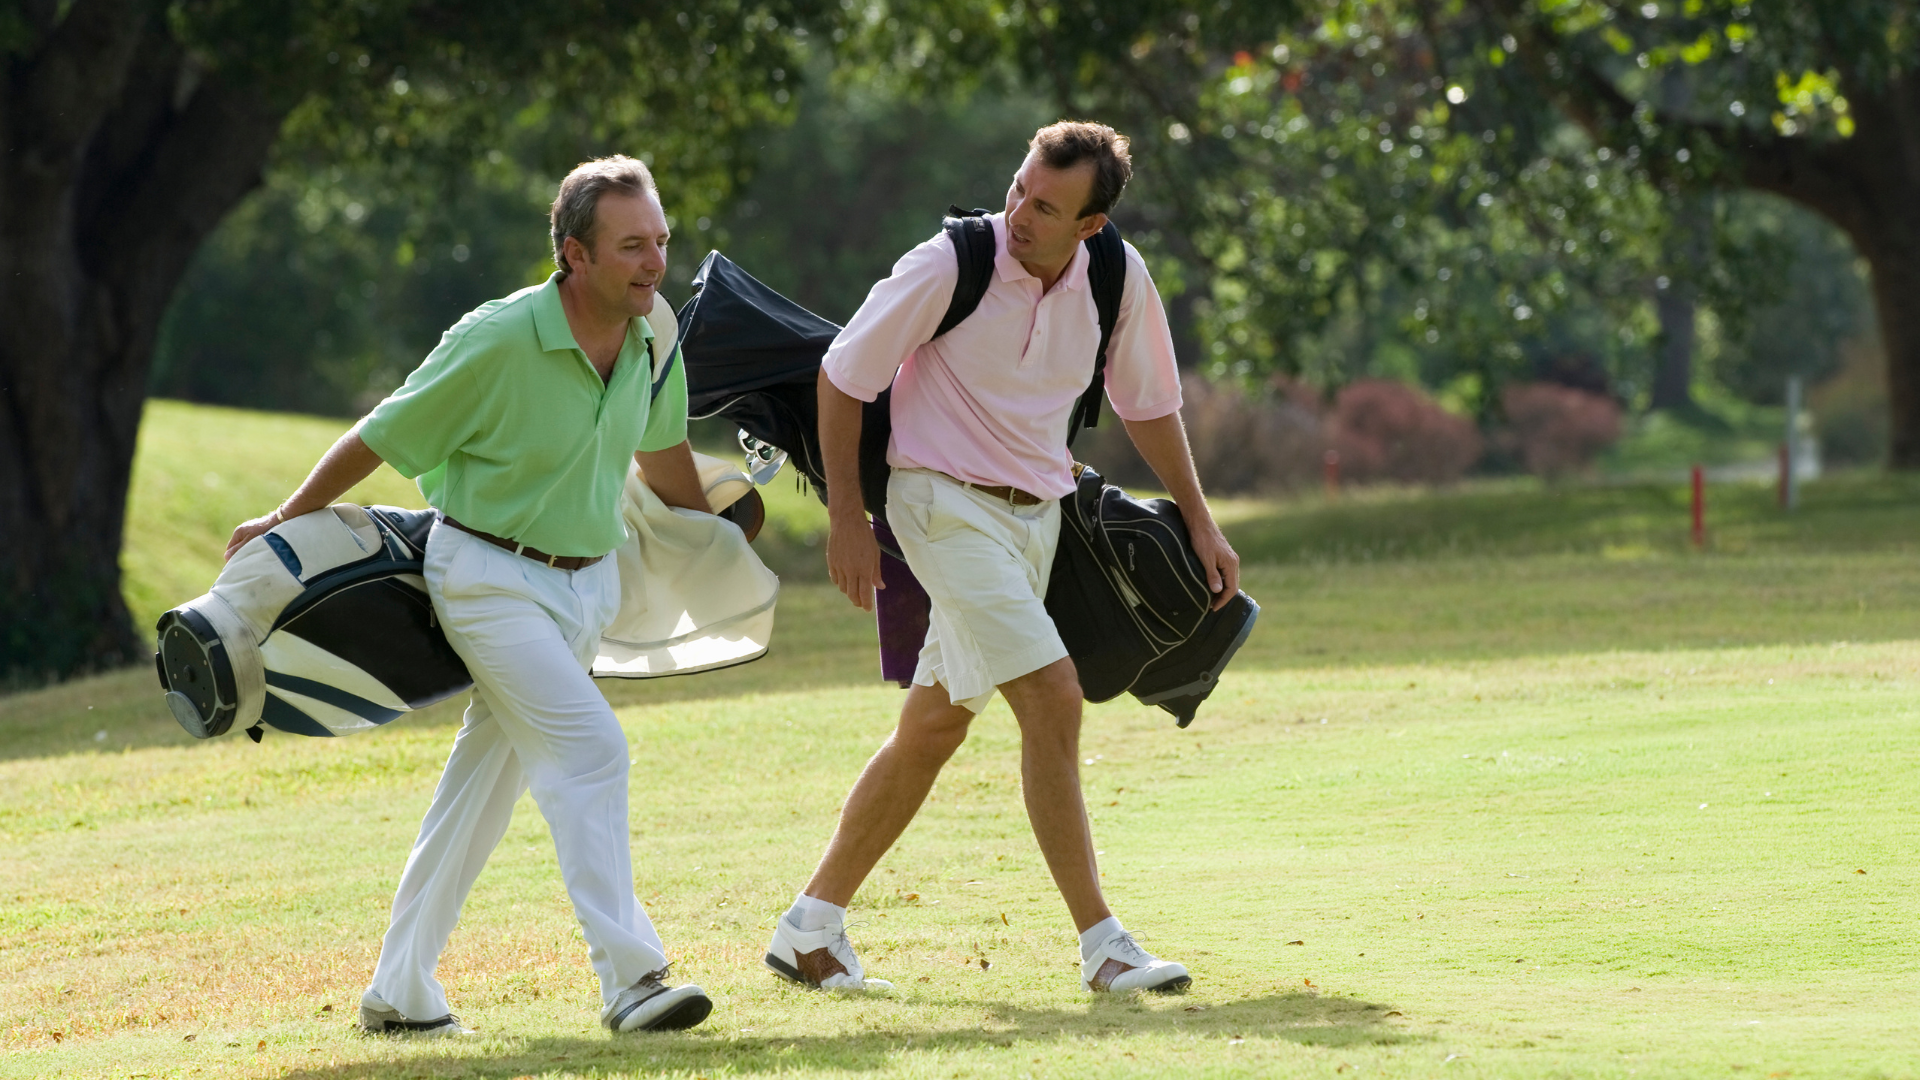 Golfers on the course carrying their bags